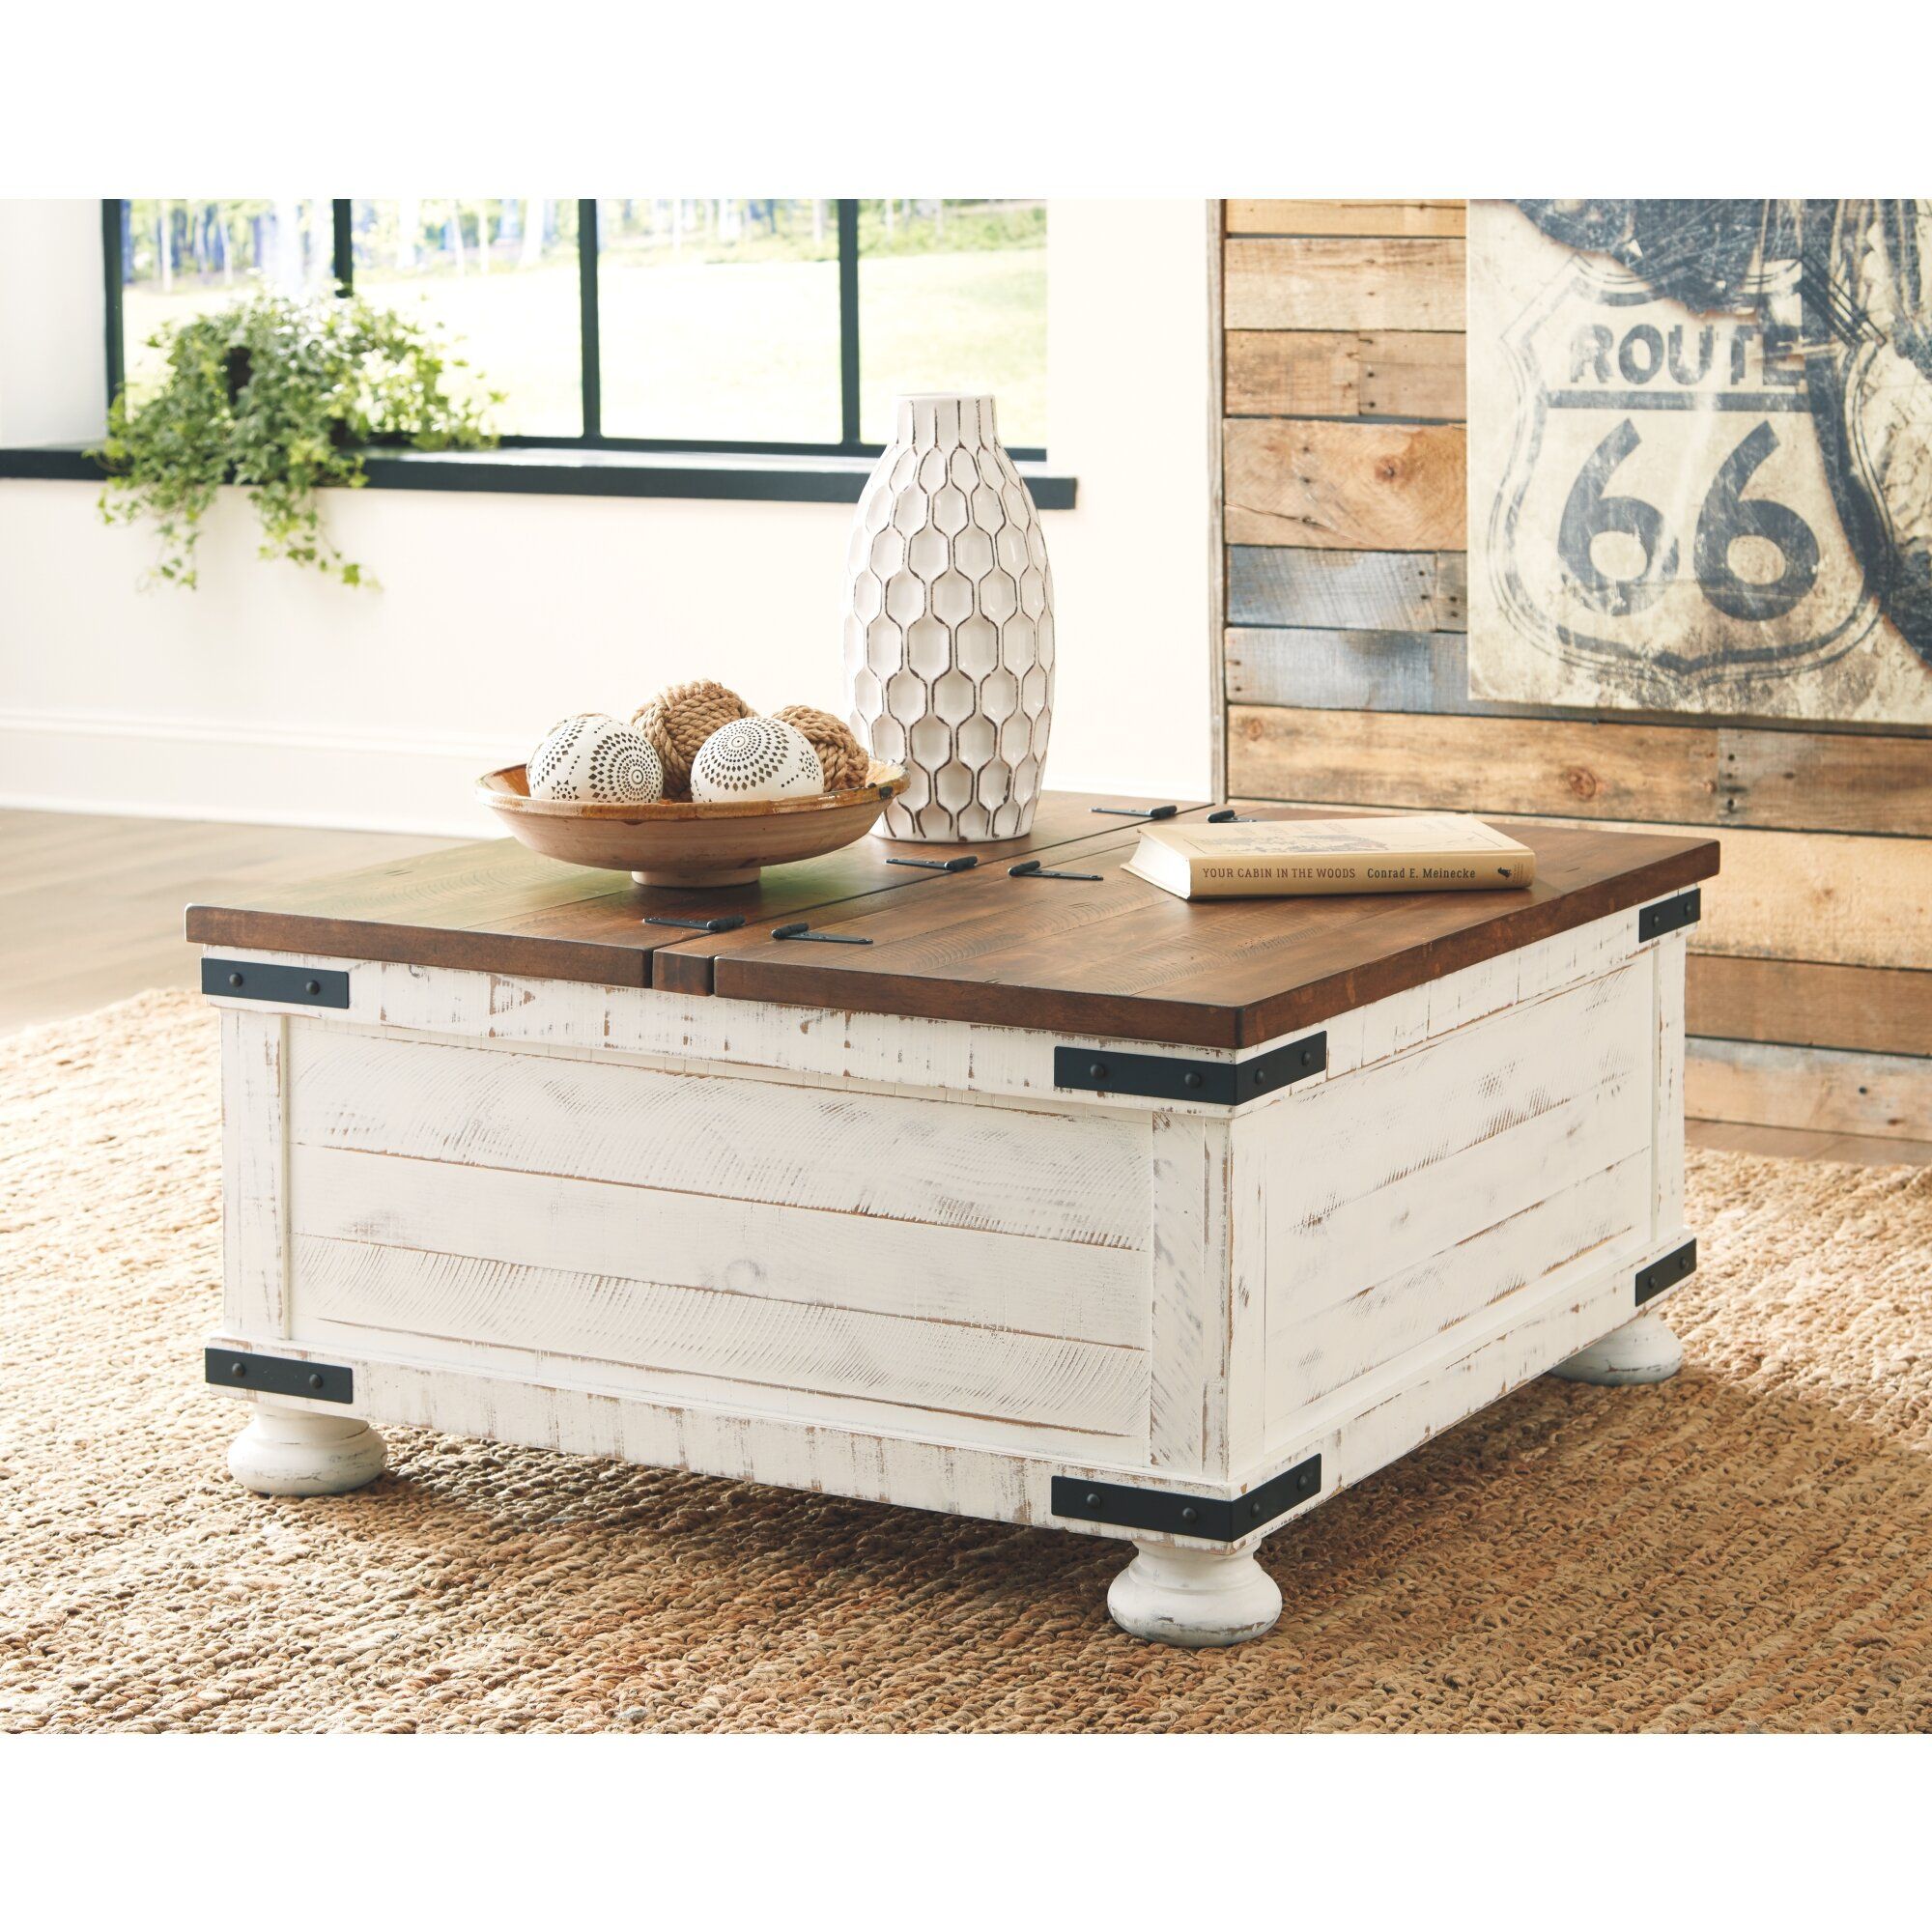 Gracie Oaks Etha Coffee Table & Reviews | Wayfair Within Coffee Tables With Storage (View 12 of 15)